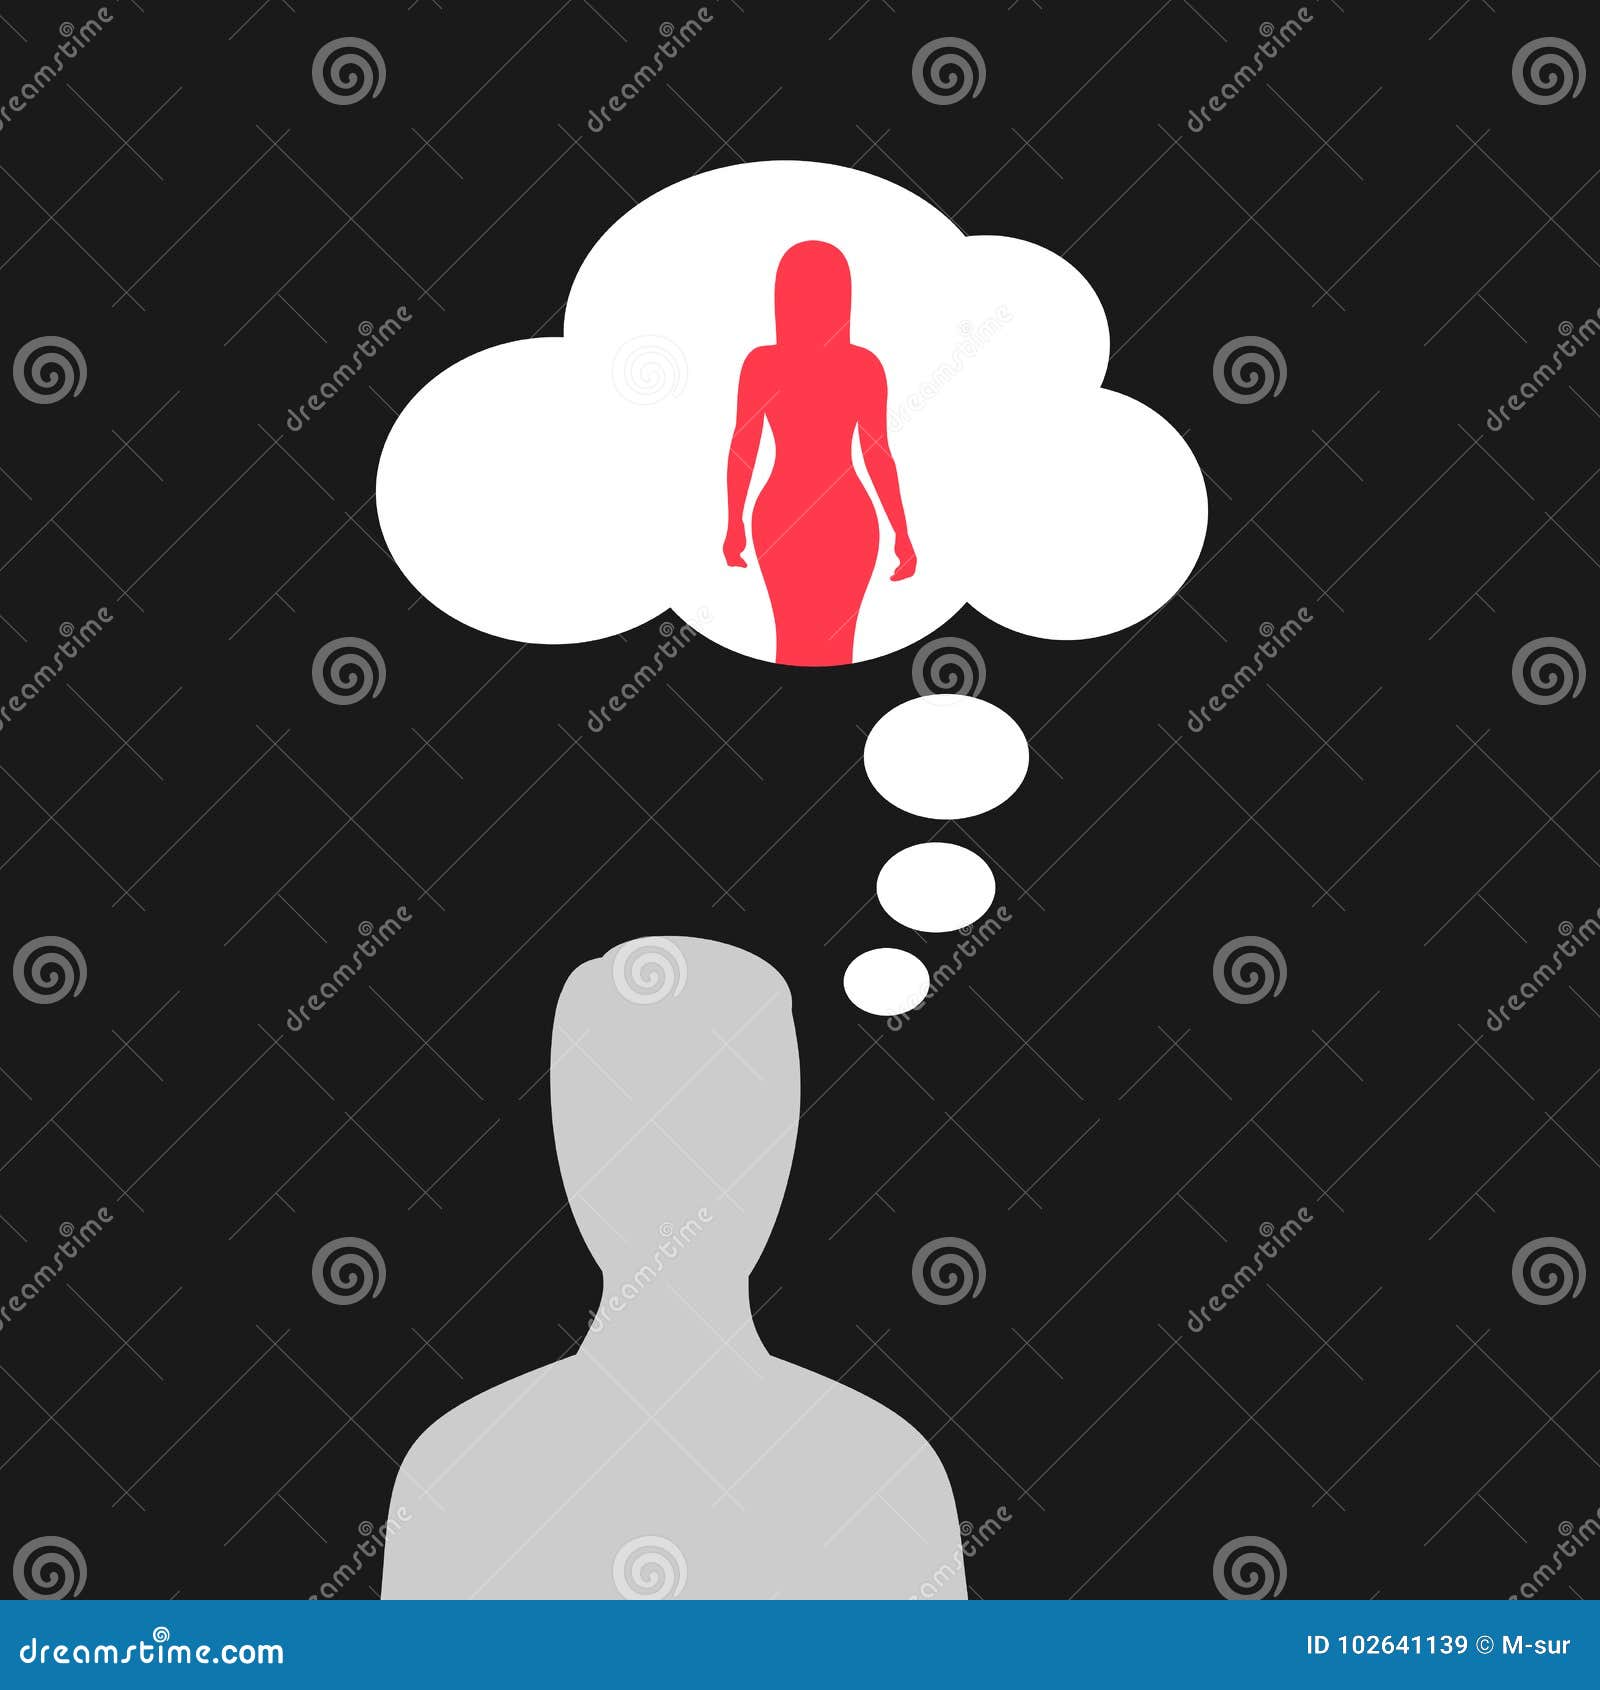 Man Is Thinking About Beautiful And Woman Stock Vector Illustration